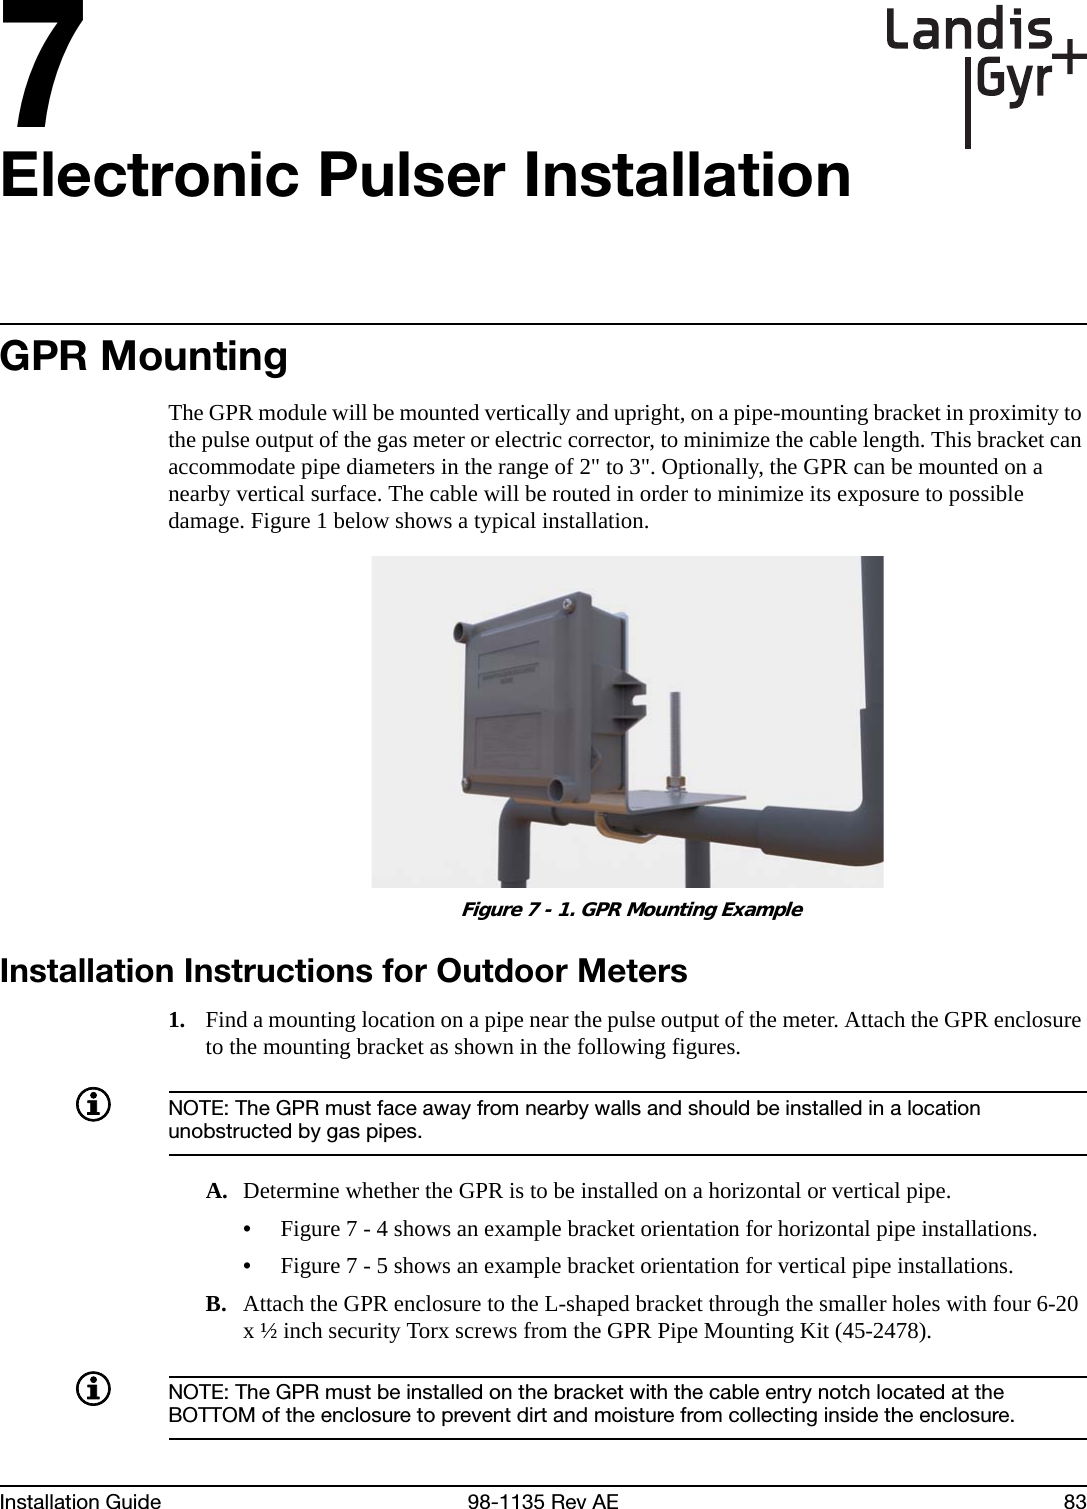 7Installation Guide 98-1135 Rev AE 83Electronic Pulser InstallationGPR MountingThe GPR module will be mounted vertically and upright, on a pipe-mounting bracket in proximity to the pulse output of the gas meter or electric corrector, to minimize the cable length. This bracket can accommodate pipe diameters in the range of 2&quot; to 3&quot;. Optionally, the GPR can be mounted on a nearby vertical surface. The cable will be routed in order to minimize its exposure to possible damage. Figure 1 below shows a typical installation. Figure 7 - 1. GPR Mounting ExampleInstallation Instructions for Outdoor Meters1. Find a mounting location on a pipe near the pulse output of the meter. Attach the GPR enclosure to the mounting bracket as shown in the following figures.NOTE: The GPR must face away from nearby walls and should be installed in a location unobstructed by gas pipes.A. Determine whether the GPR is to be installed on a horizontal or vertical pipe.•Figure 7 - 4 shows an example bracket orientation for horizontal pipe installations.•Figure 7 - 5 shows an example bracket orientation for vertical pipe installations.B. Attach the GPR enclosure to the L-shaped bracket through the smaller holes with four 6-20 x ½ inch security Torx screws from the GPR Pipe Mounting Kit (45-2478).NOTE: The GPR must be installed on the bracket with the cable entry notch located at the BOTTOM of the enclosure to prevent dirt and moisture from collecting inside the enclosure.